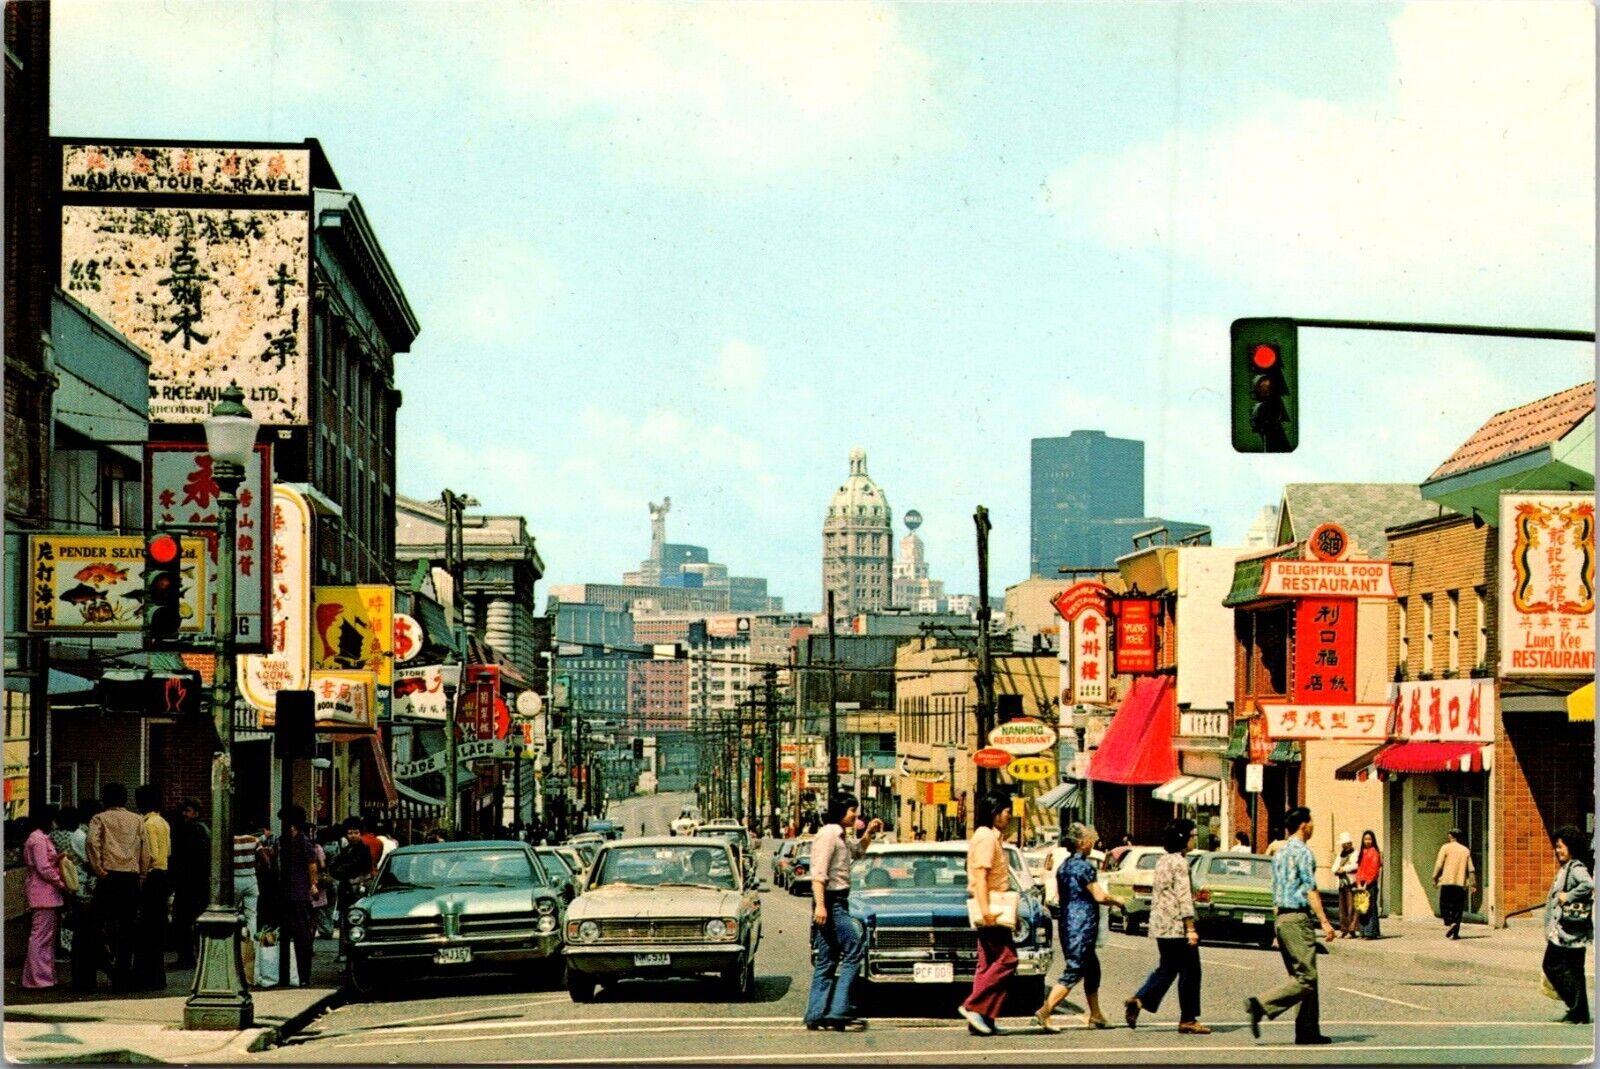 Chinatown Vancouver, B.C., Canada Postcard Street Scene Old Cars, Signs, People